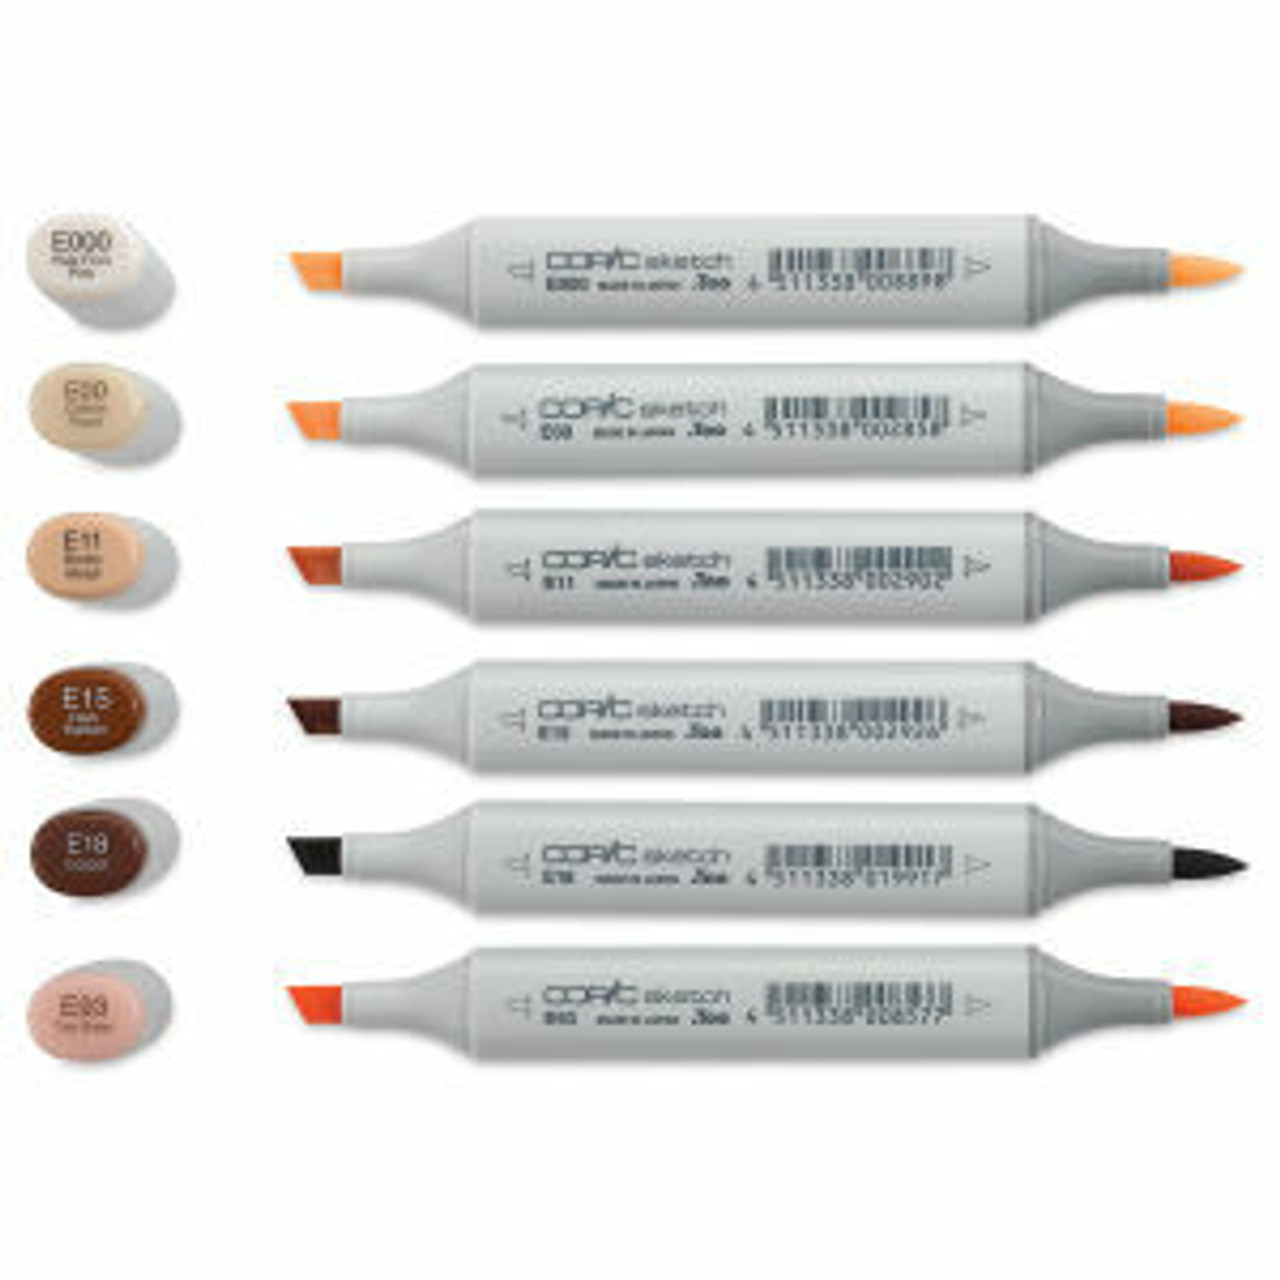 COPIC Sketch Marker Perfect Secondary Set of 6 Colors 